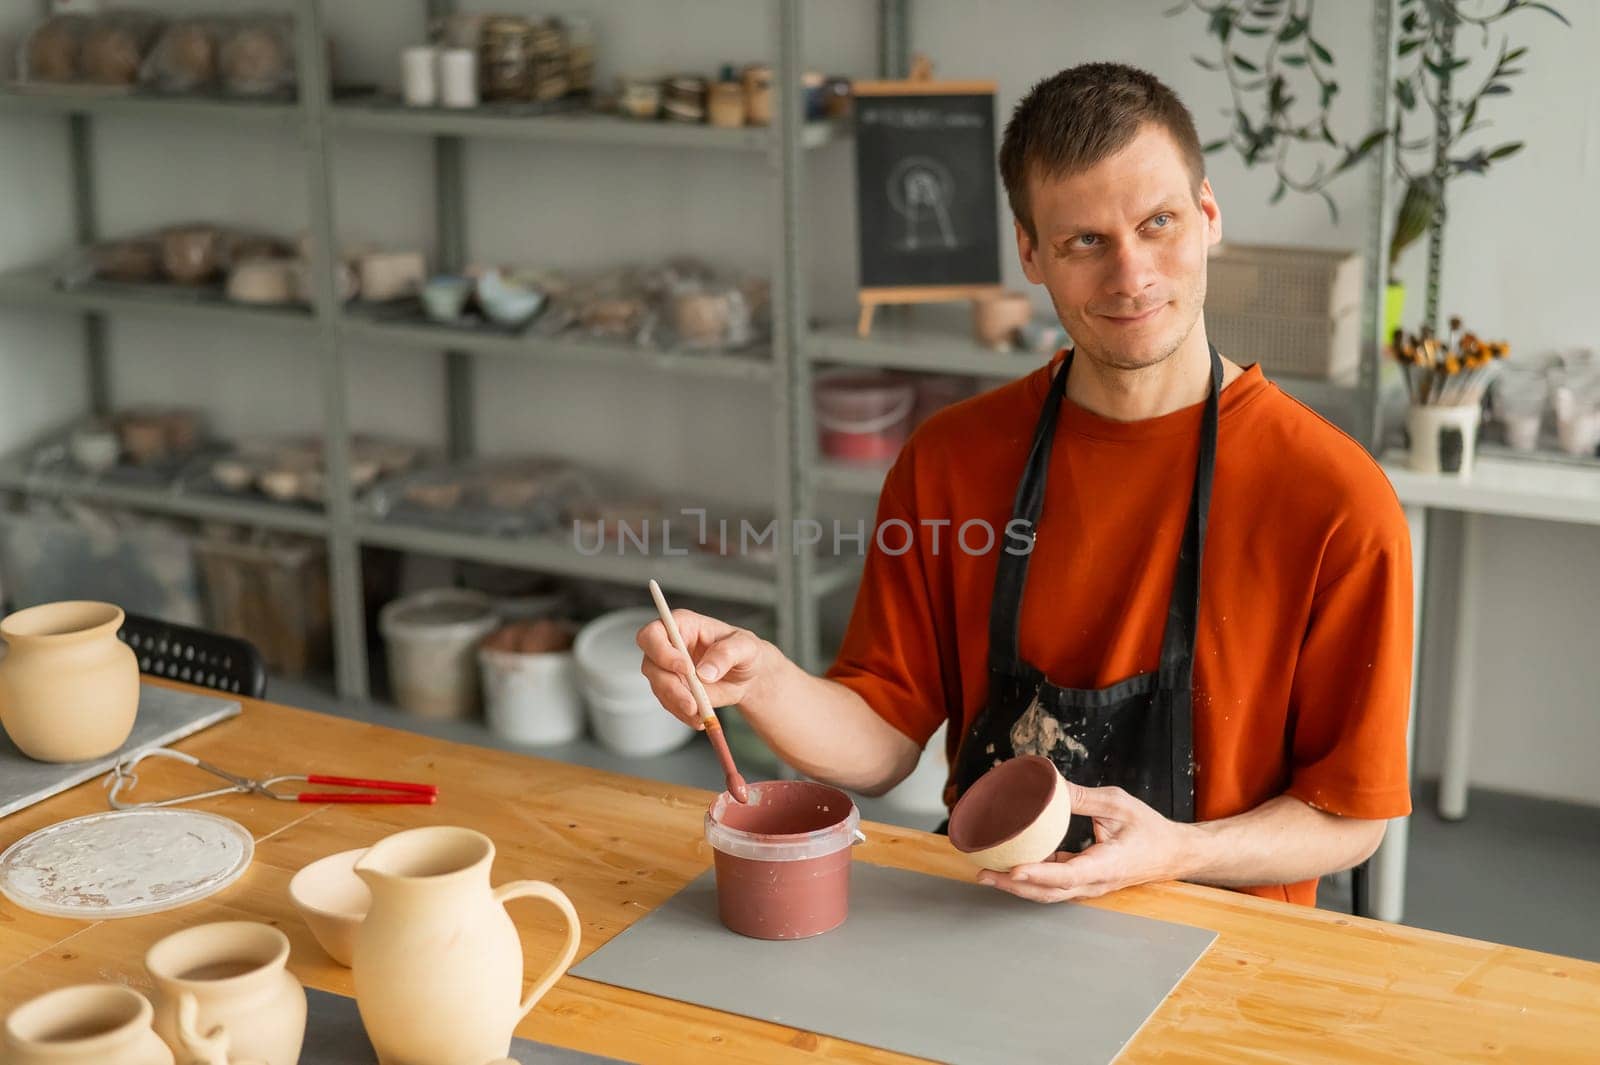 Potter paints ceramic dishes with a brush. by mrwed54